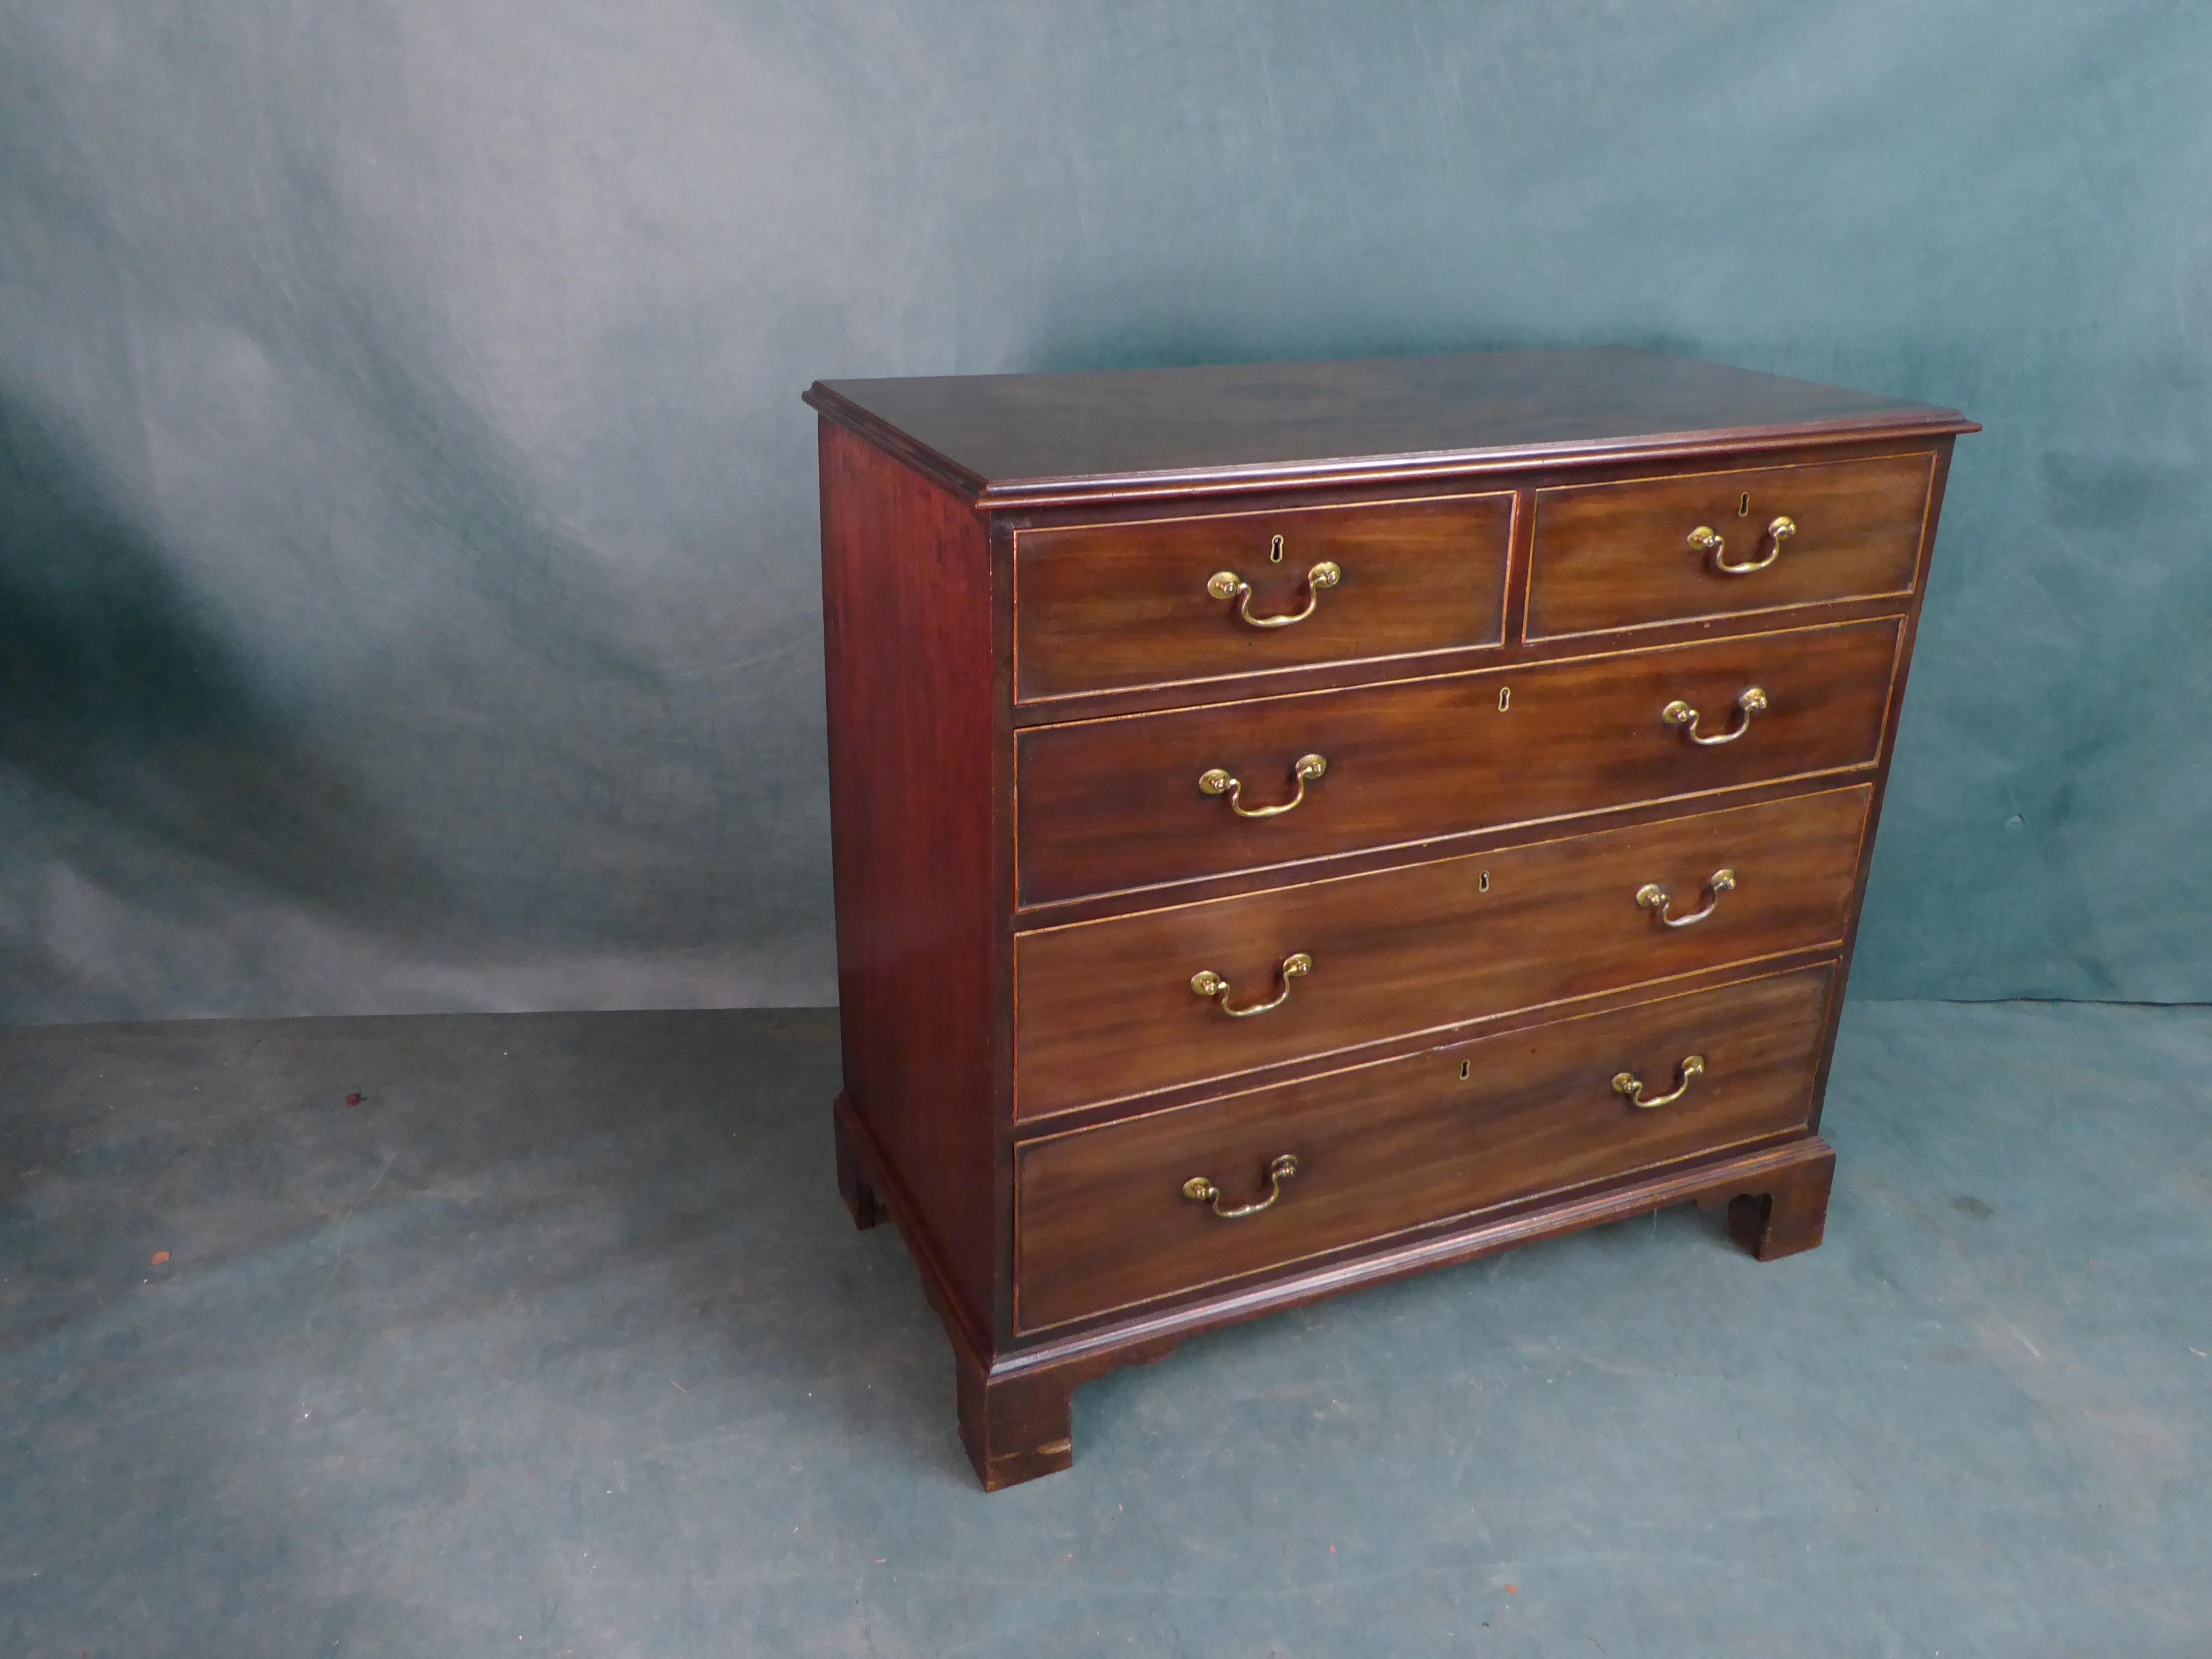 Hand-Crafted Antique Georgian mahogany scotttish chest of drawers with secret drawers within. For Sale